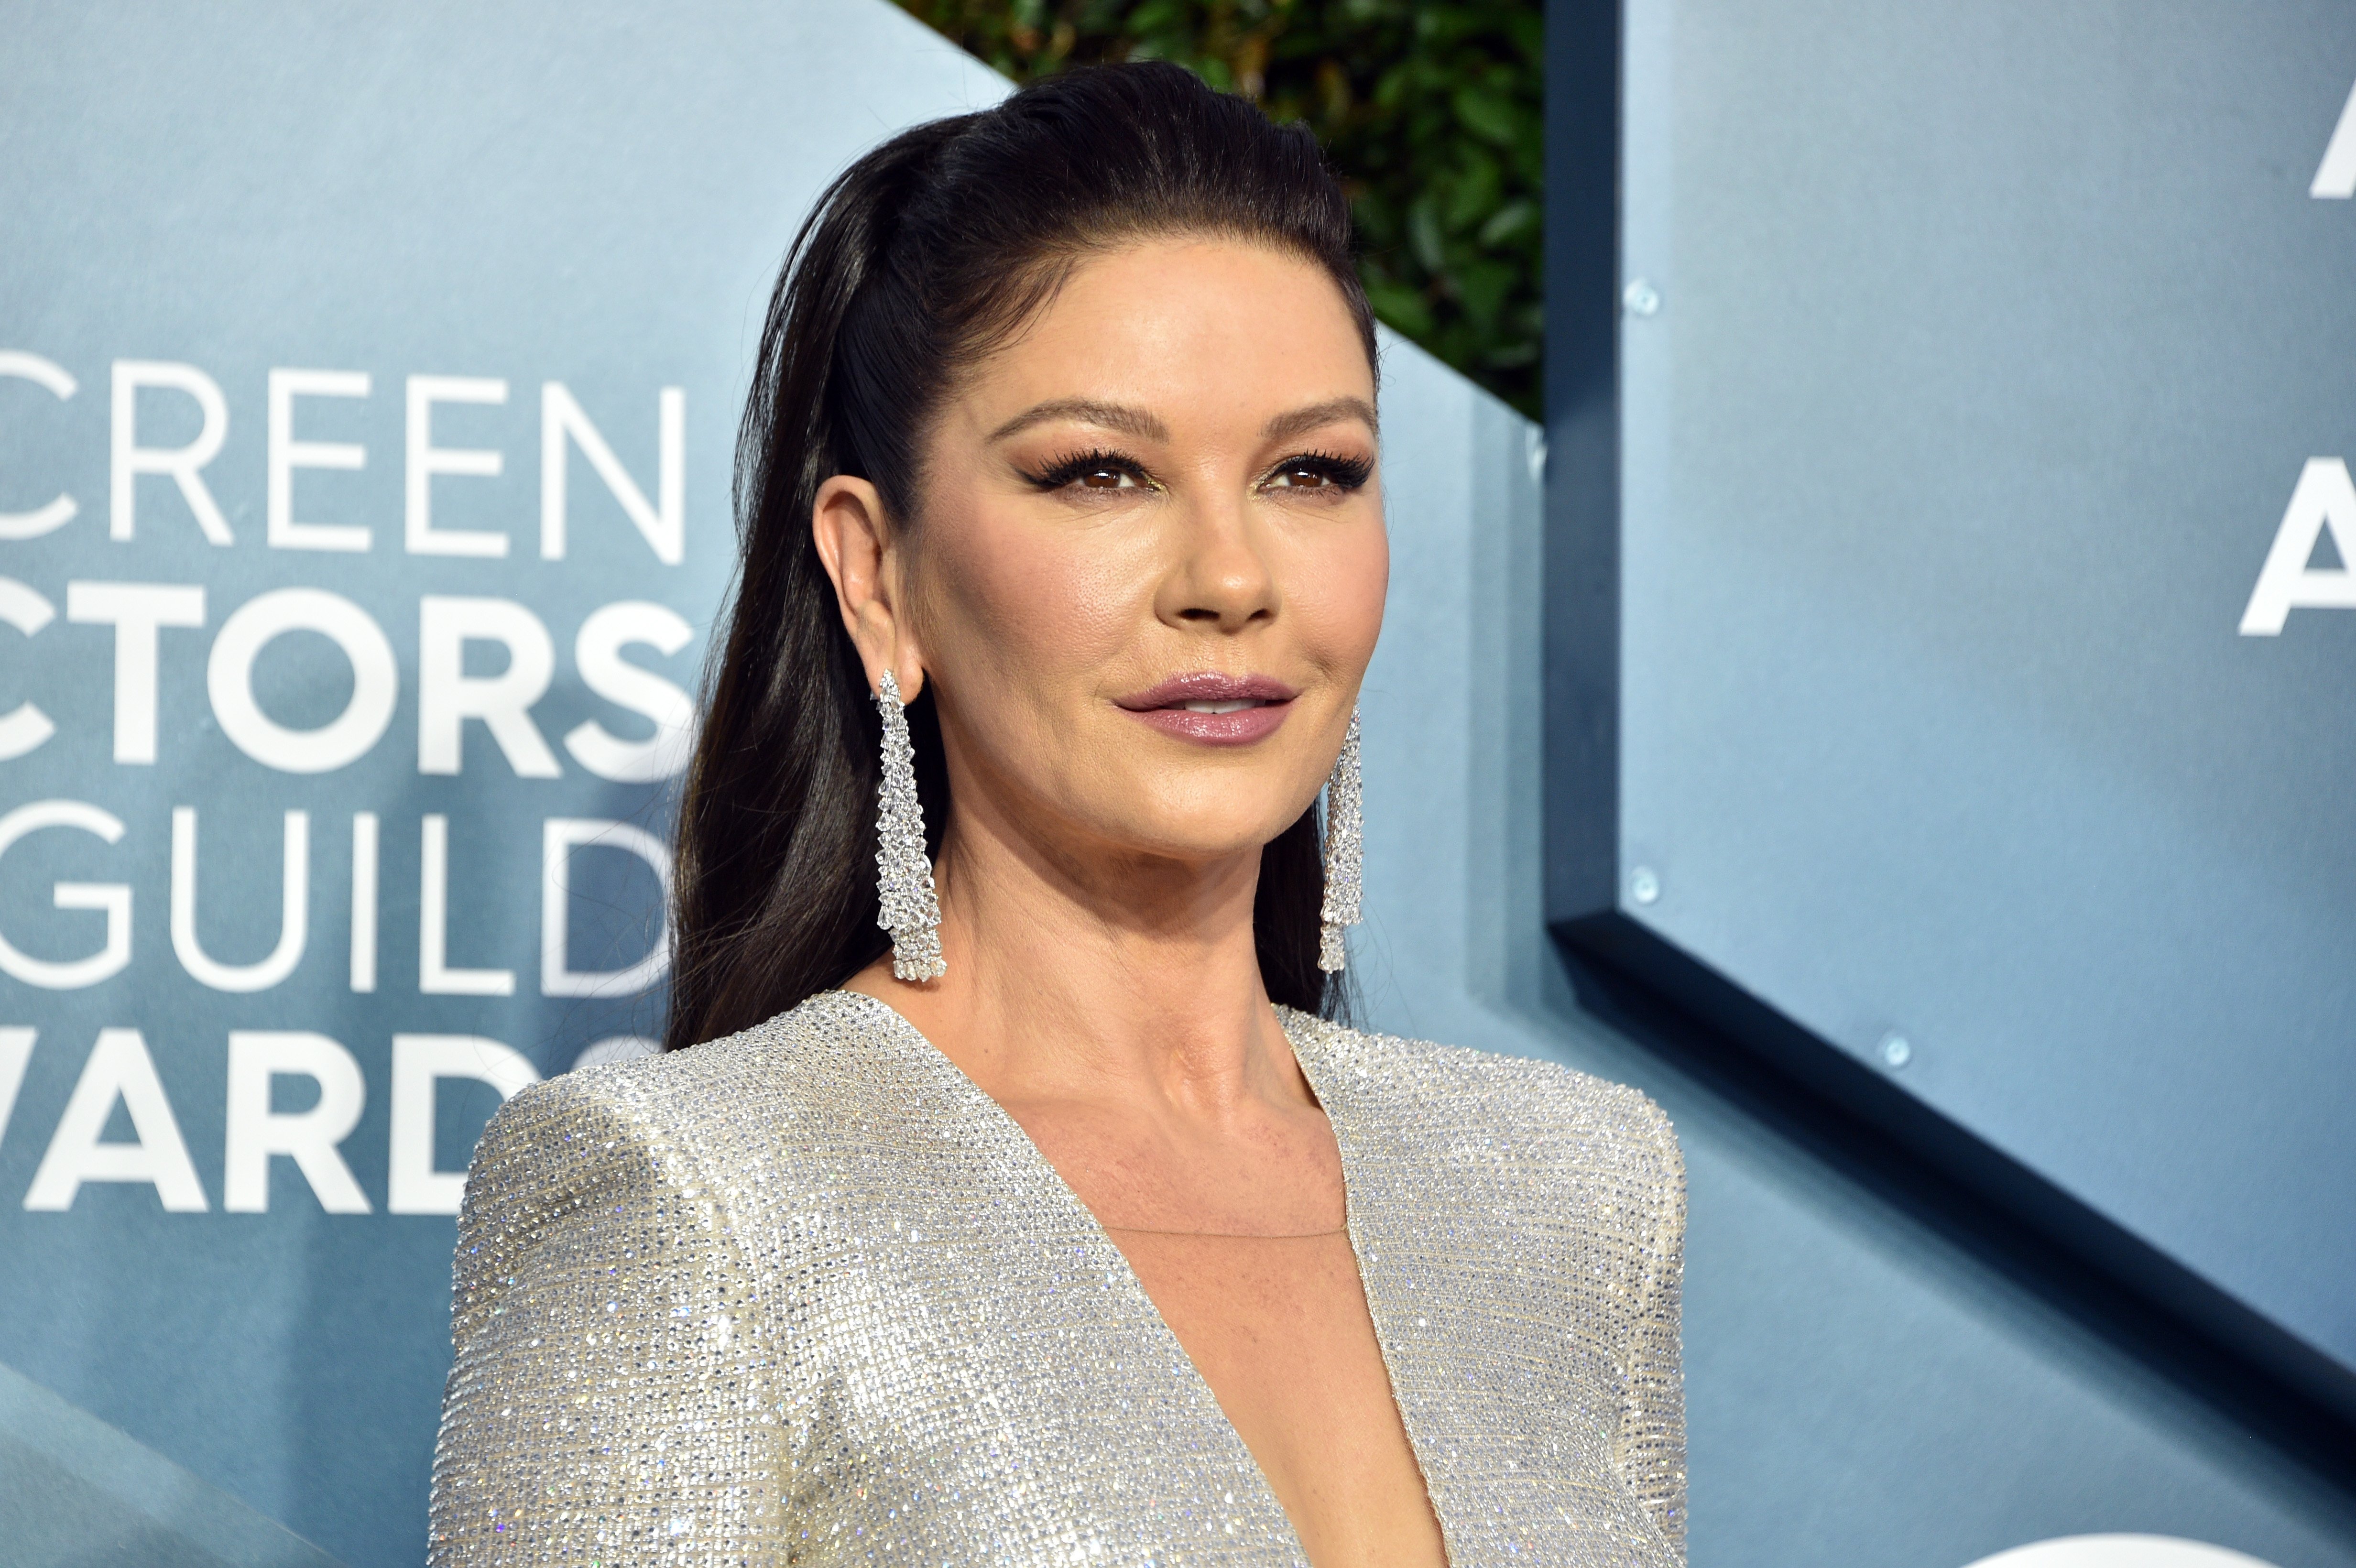 Catherine Zeta-Jones attends the 26th Annual Screen Actors Guild Awards at The Shrine Auditorium on January 19, 2020 in Los Angeles, California | Photo: Getty Images